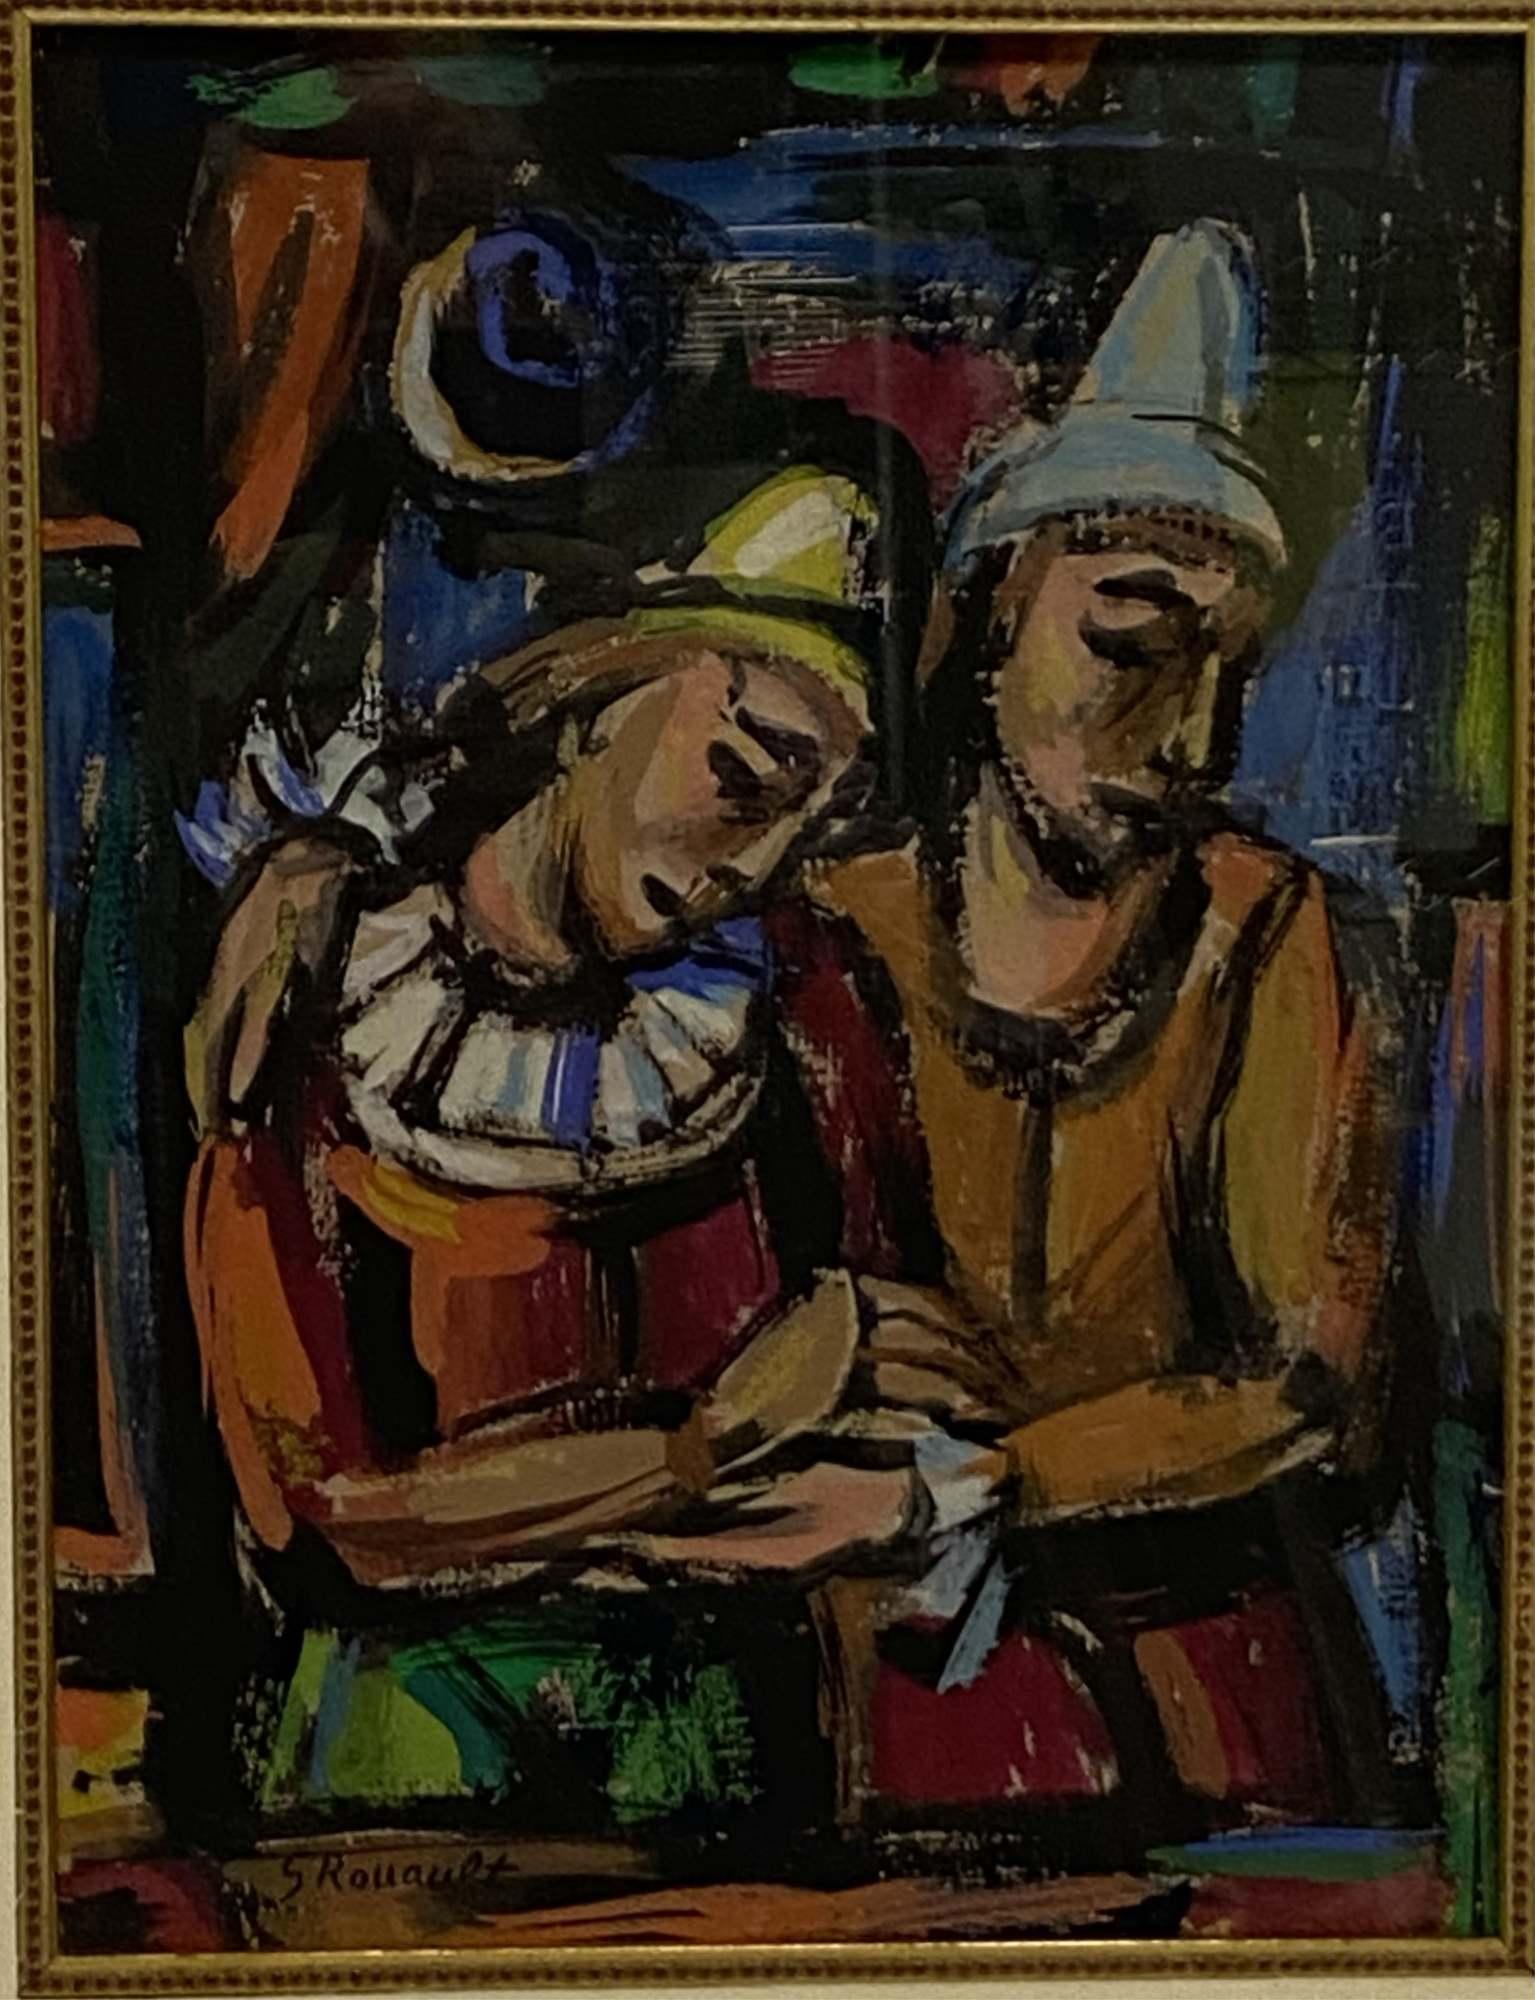 AFTER GEORGES ROUAULT - "TWO CLOWNS"